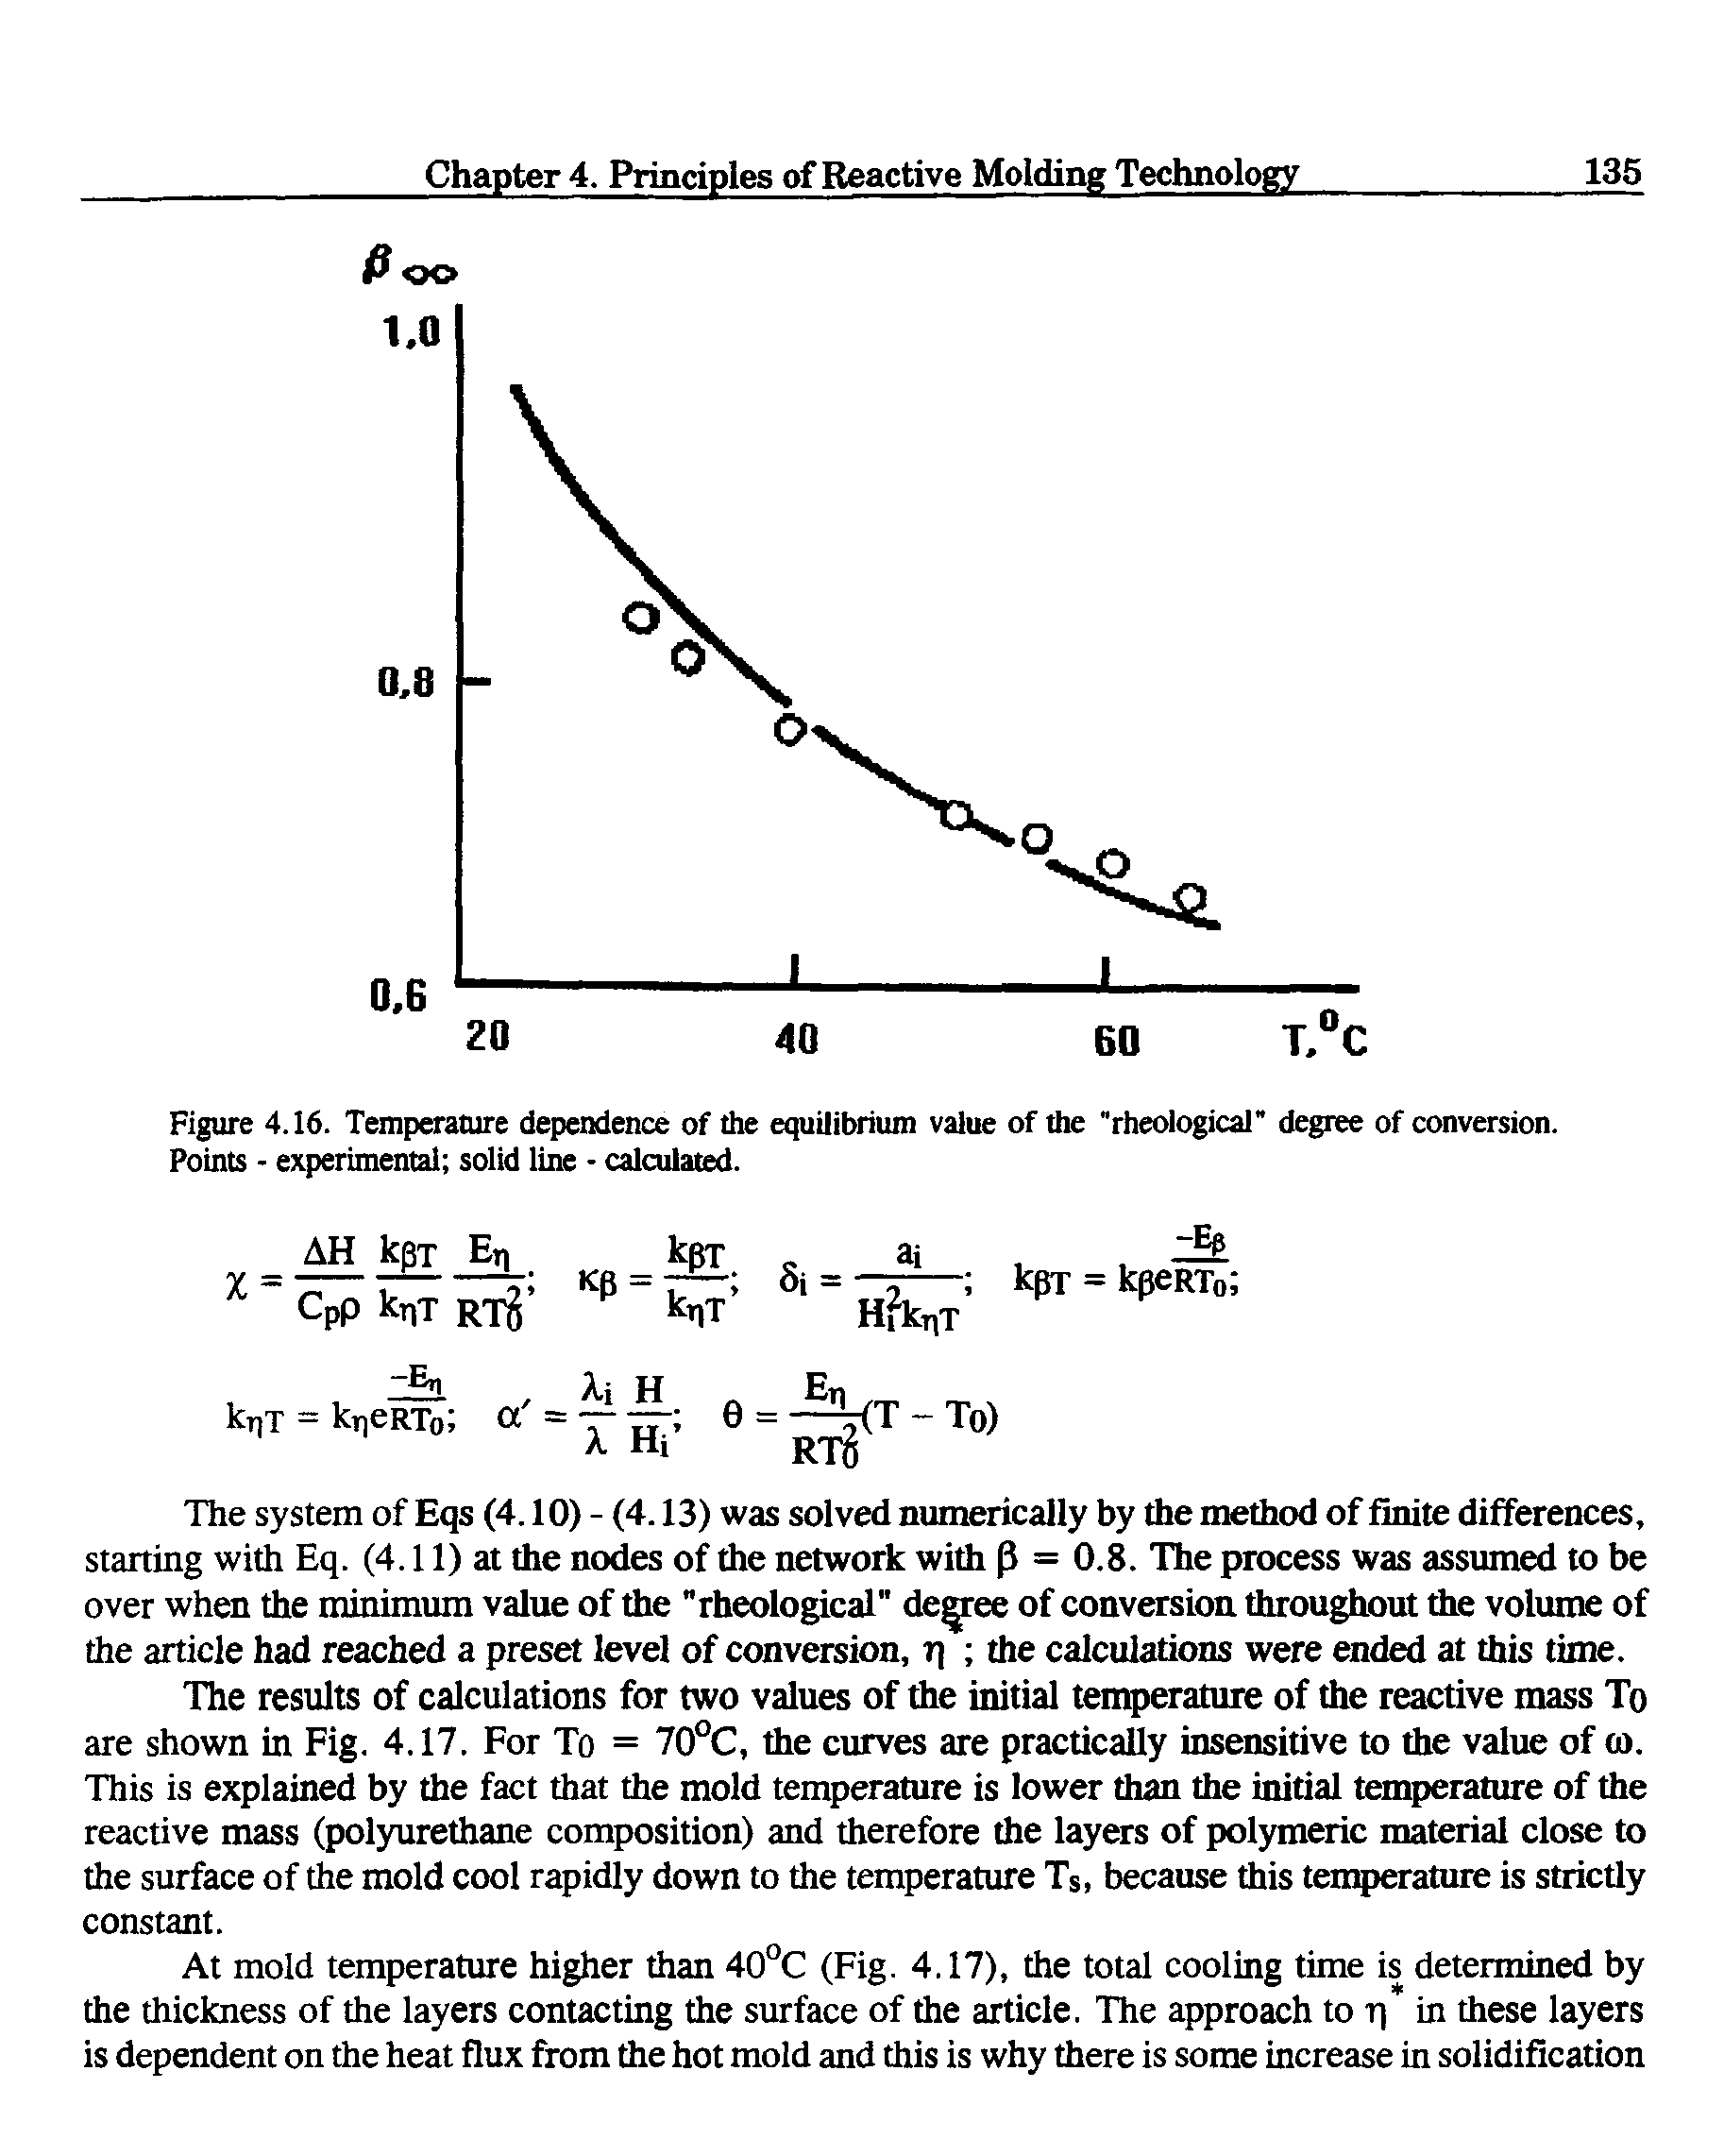 Figure 4.16. Temperature dependence of the equilibrium value of the "rheological" degree of conversion. Points - experimental solid line calculated.